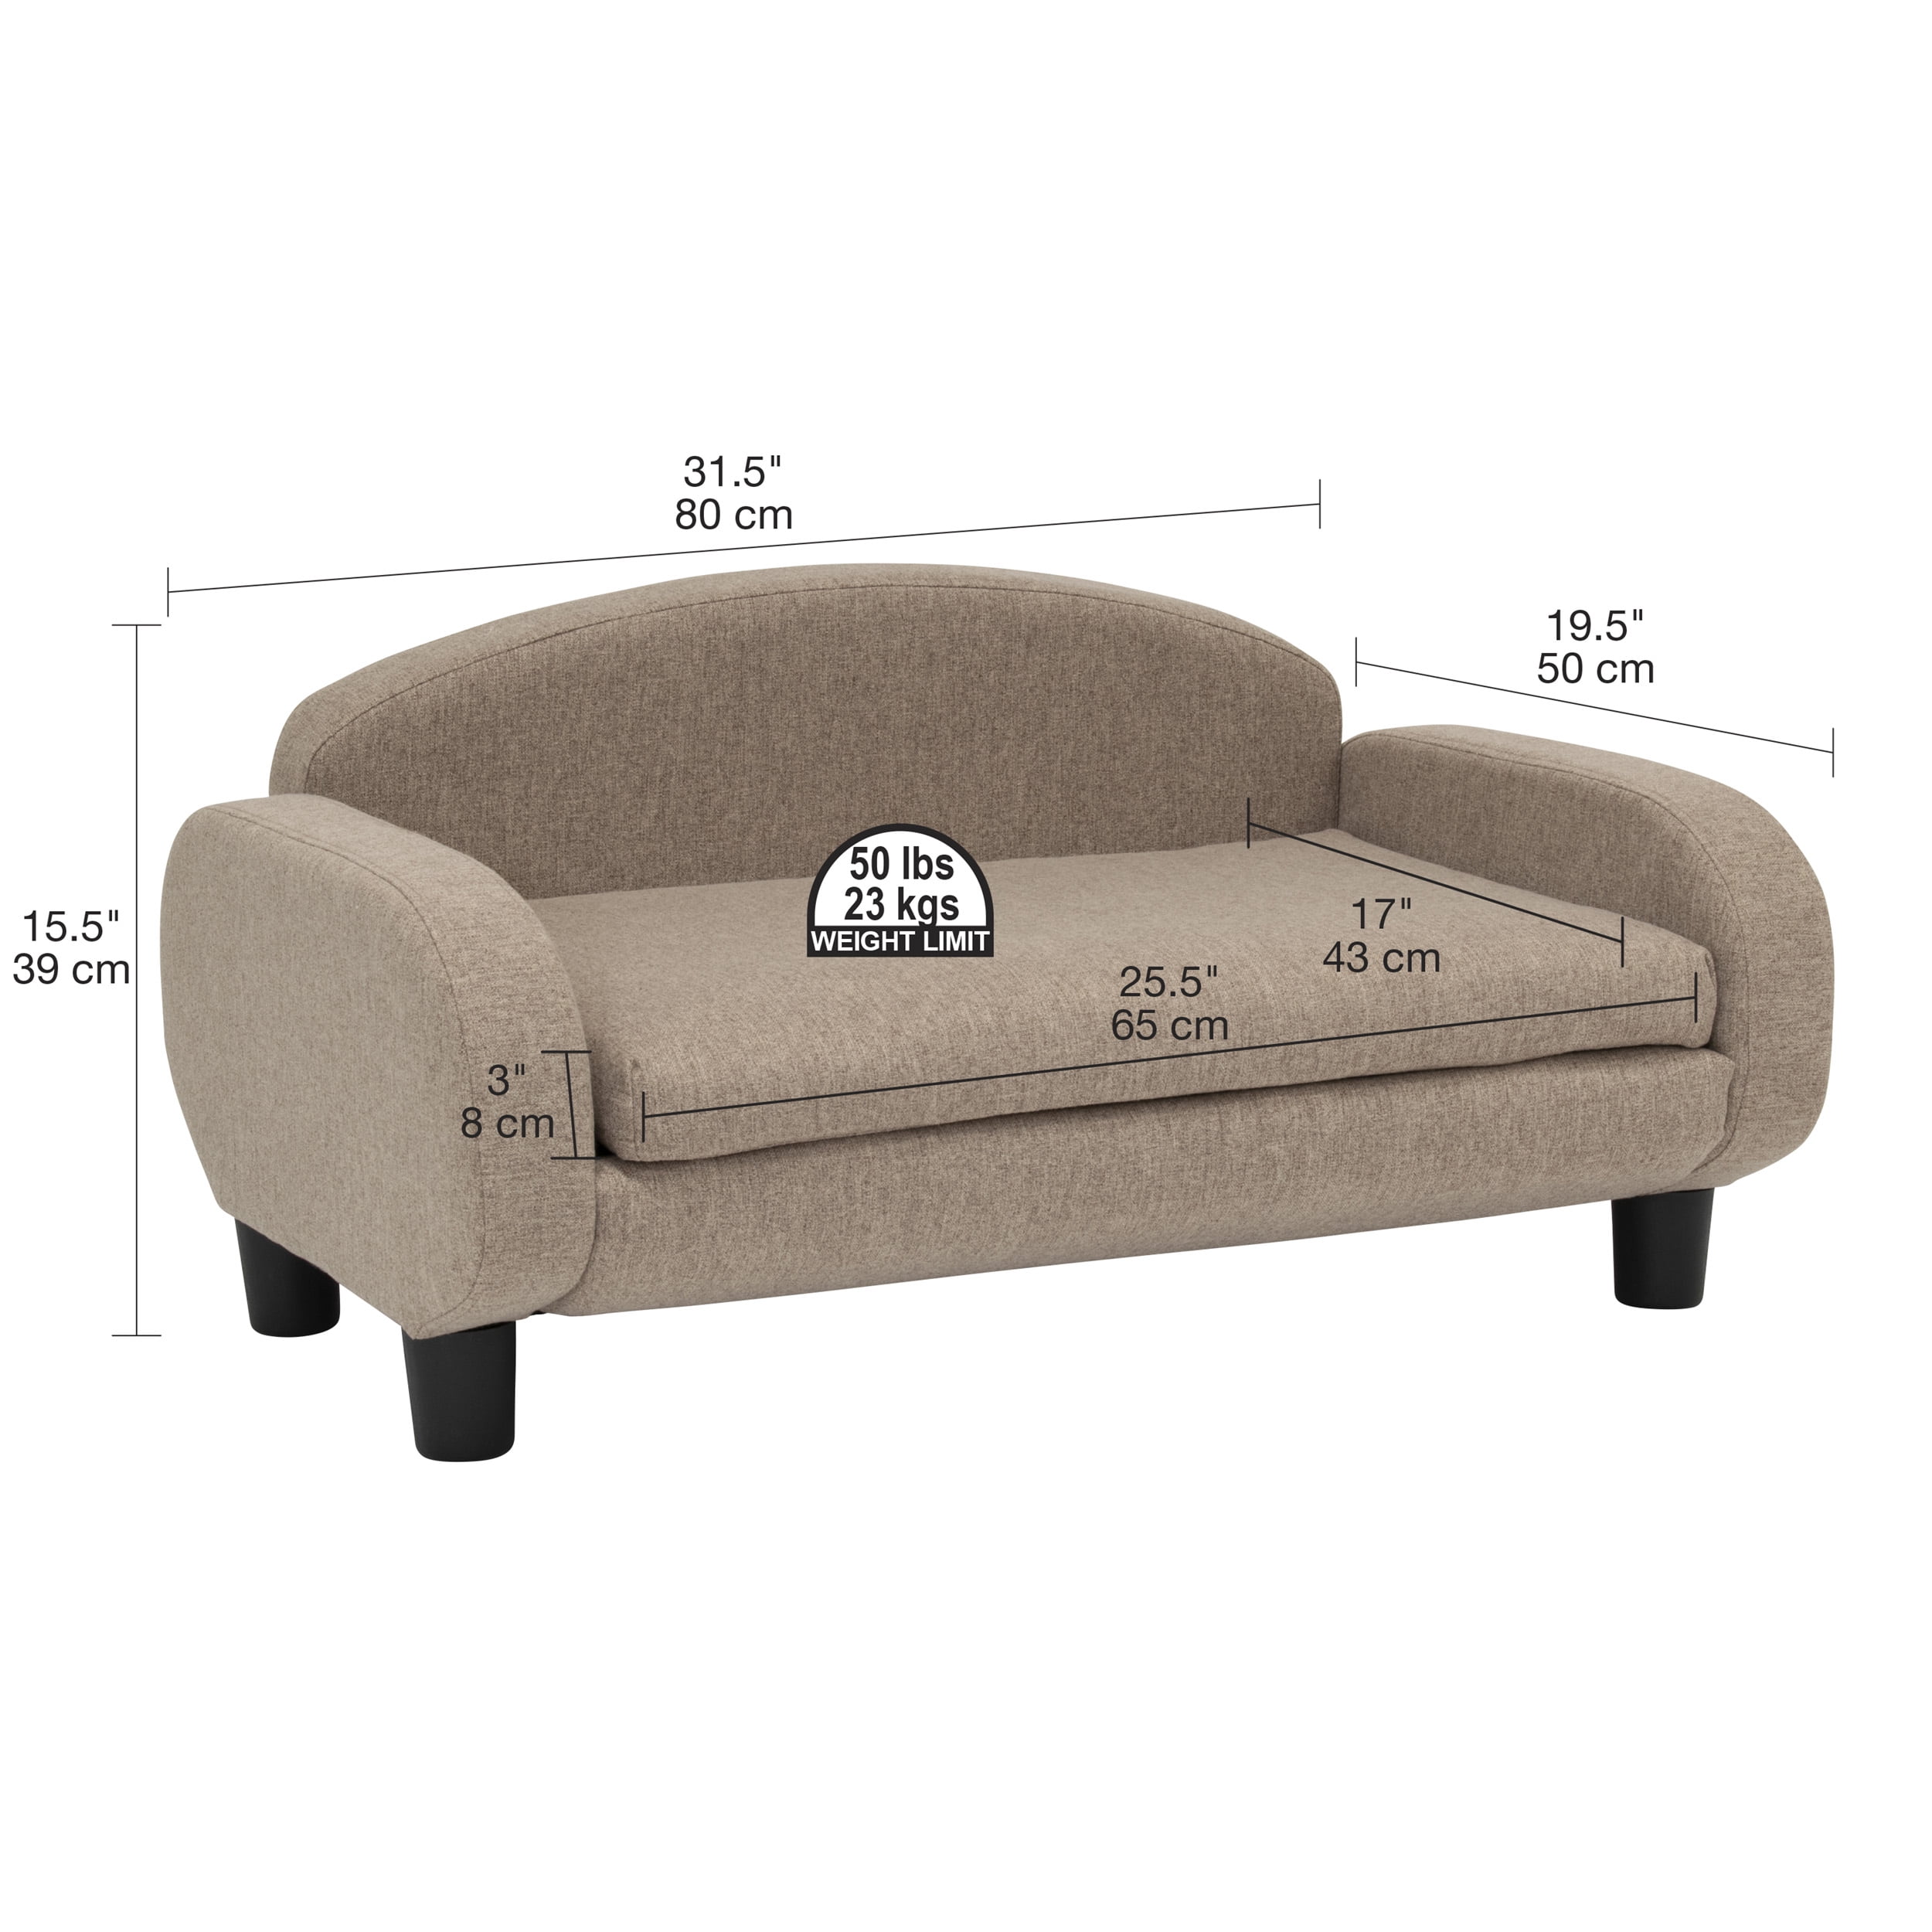 Paws & Purrs Espresso & Sand Pet Bed with Storage Drawer